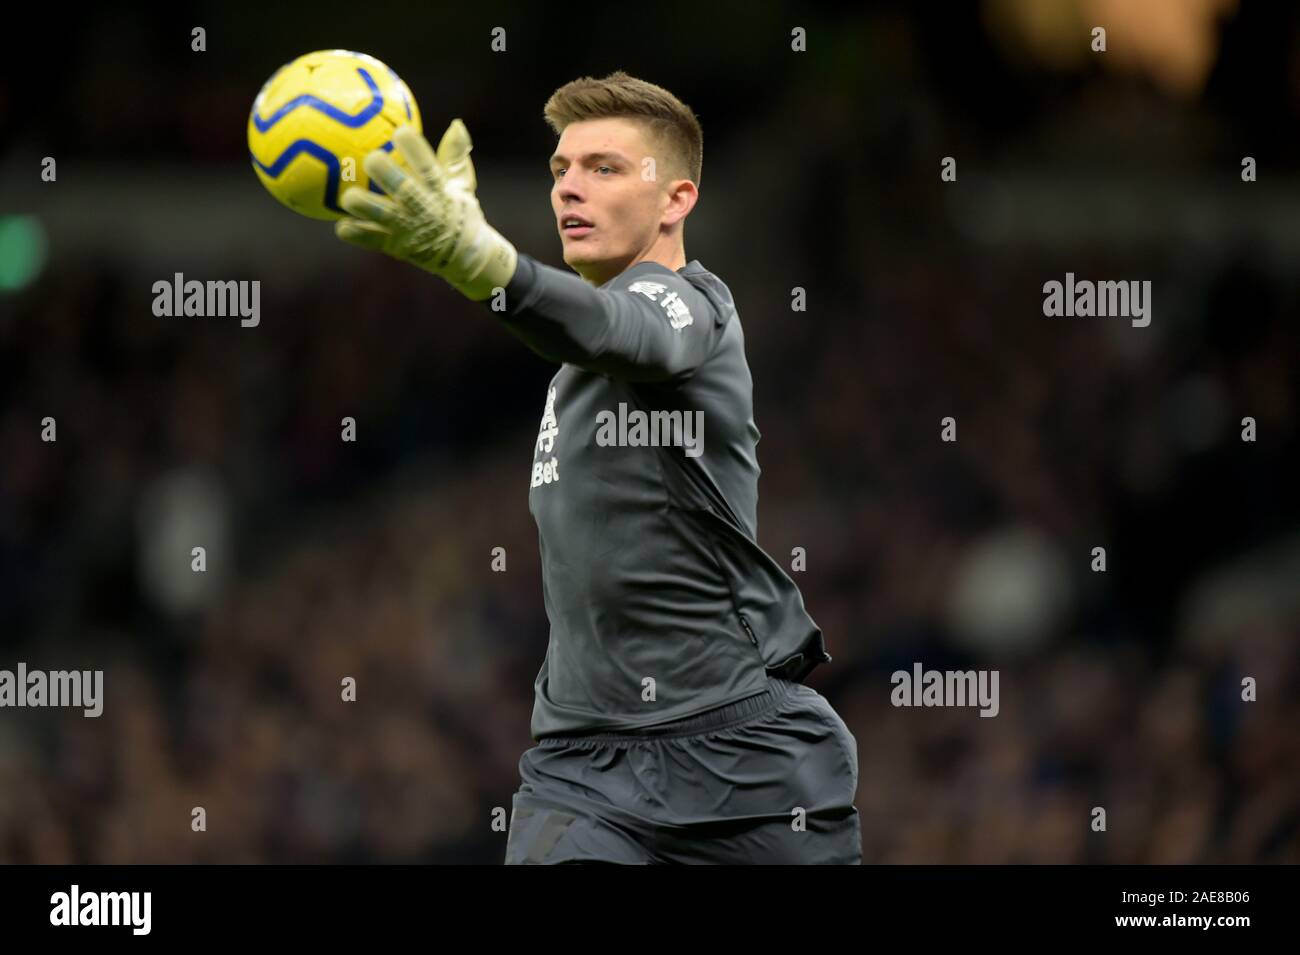 London, UK. 7th December 2019. Nick Pope of Burnley during the Tottenham Hotspur vs Burnley Premier League Football match at the Tottenham Hotspur Stadium on 7th December 2019-EDITORIAL USE ONLY No use with unauthorised audio, video, data, fixture lists (outside the EU), club/league logos or 'live' services. Online in-match use limited to 45 images (+15 in extra time). No use to emulate moving images. No use in betting, games or single club/league/player publications/services- Credit: Martin Dalton/Alamy Live News Stock Photo